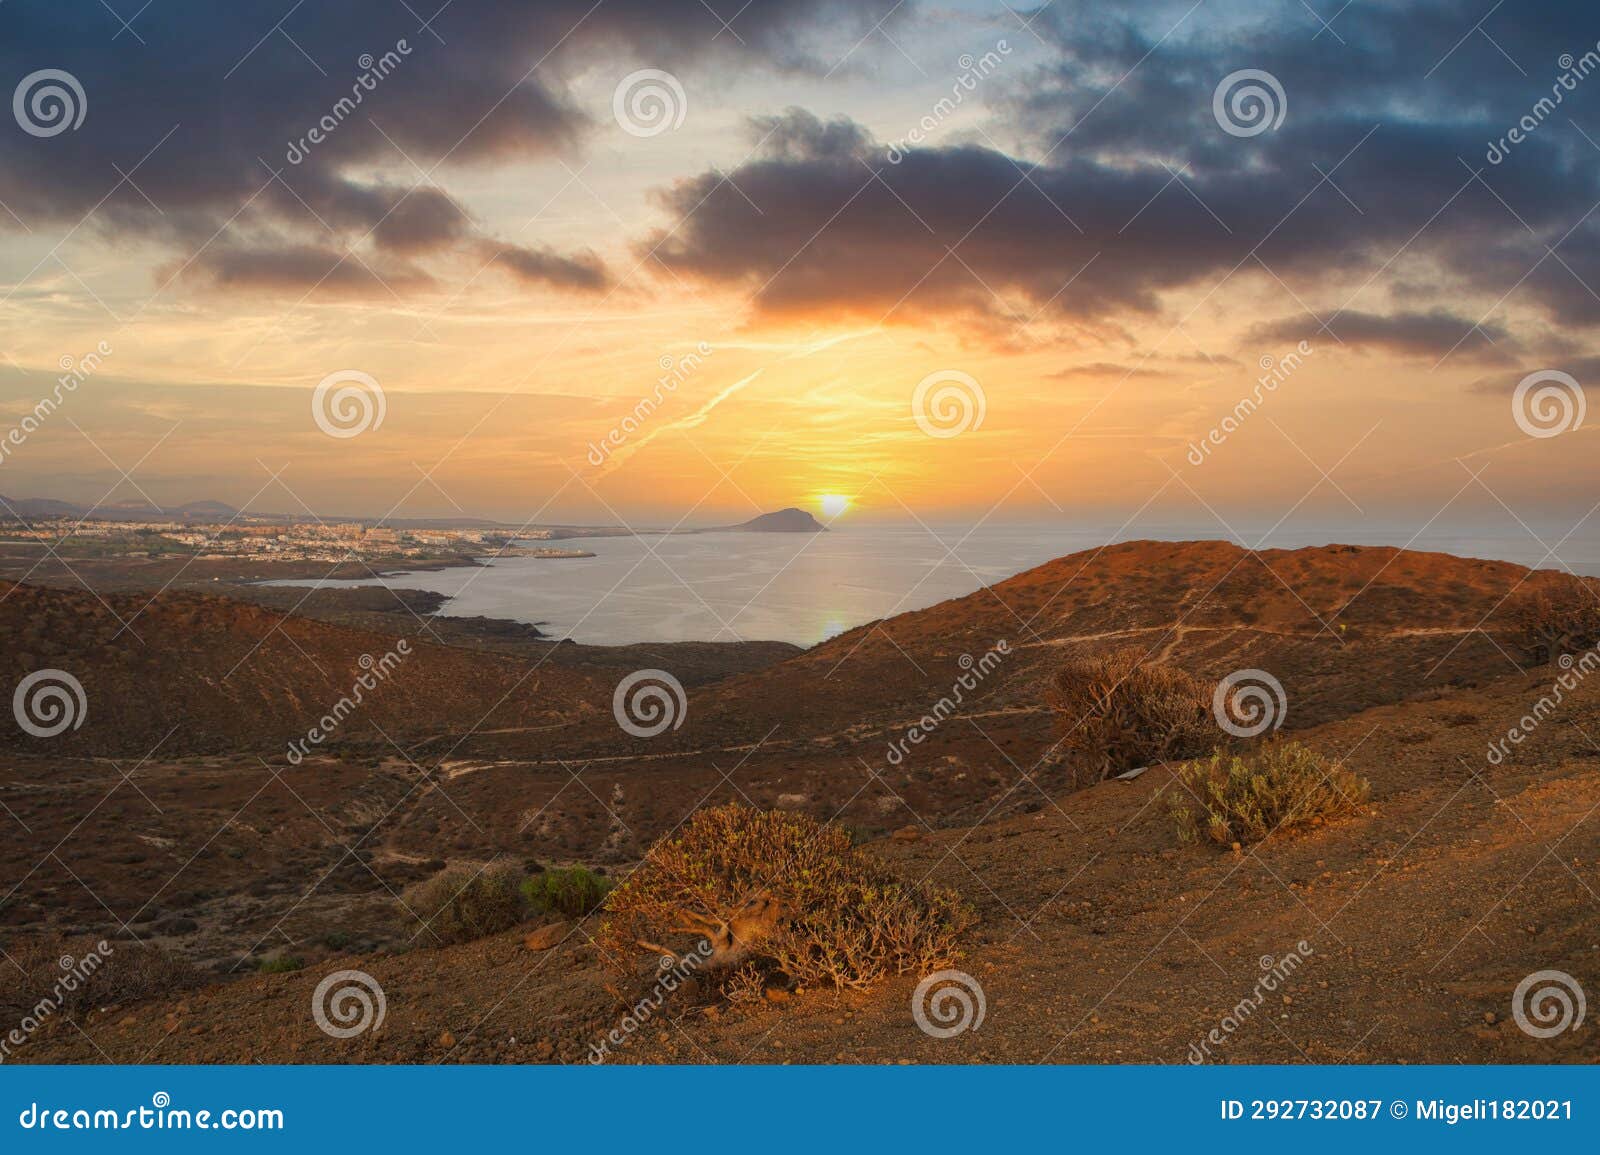 spectacular sunrise from yellow mountain (montaÃ±a amarilla) in tenerife.